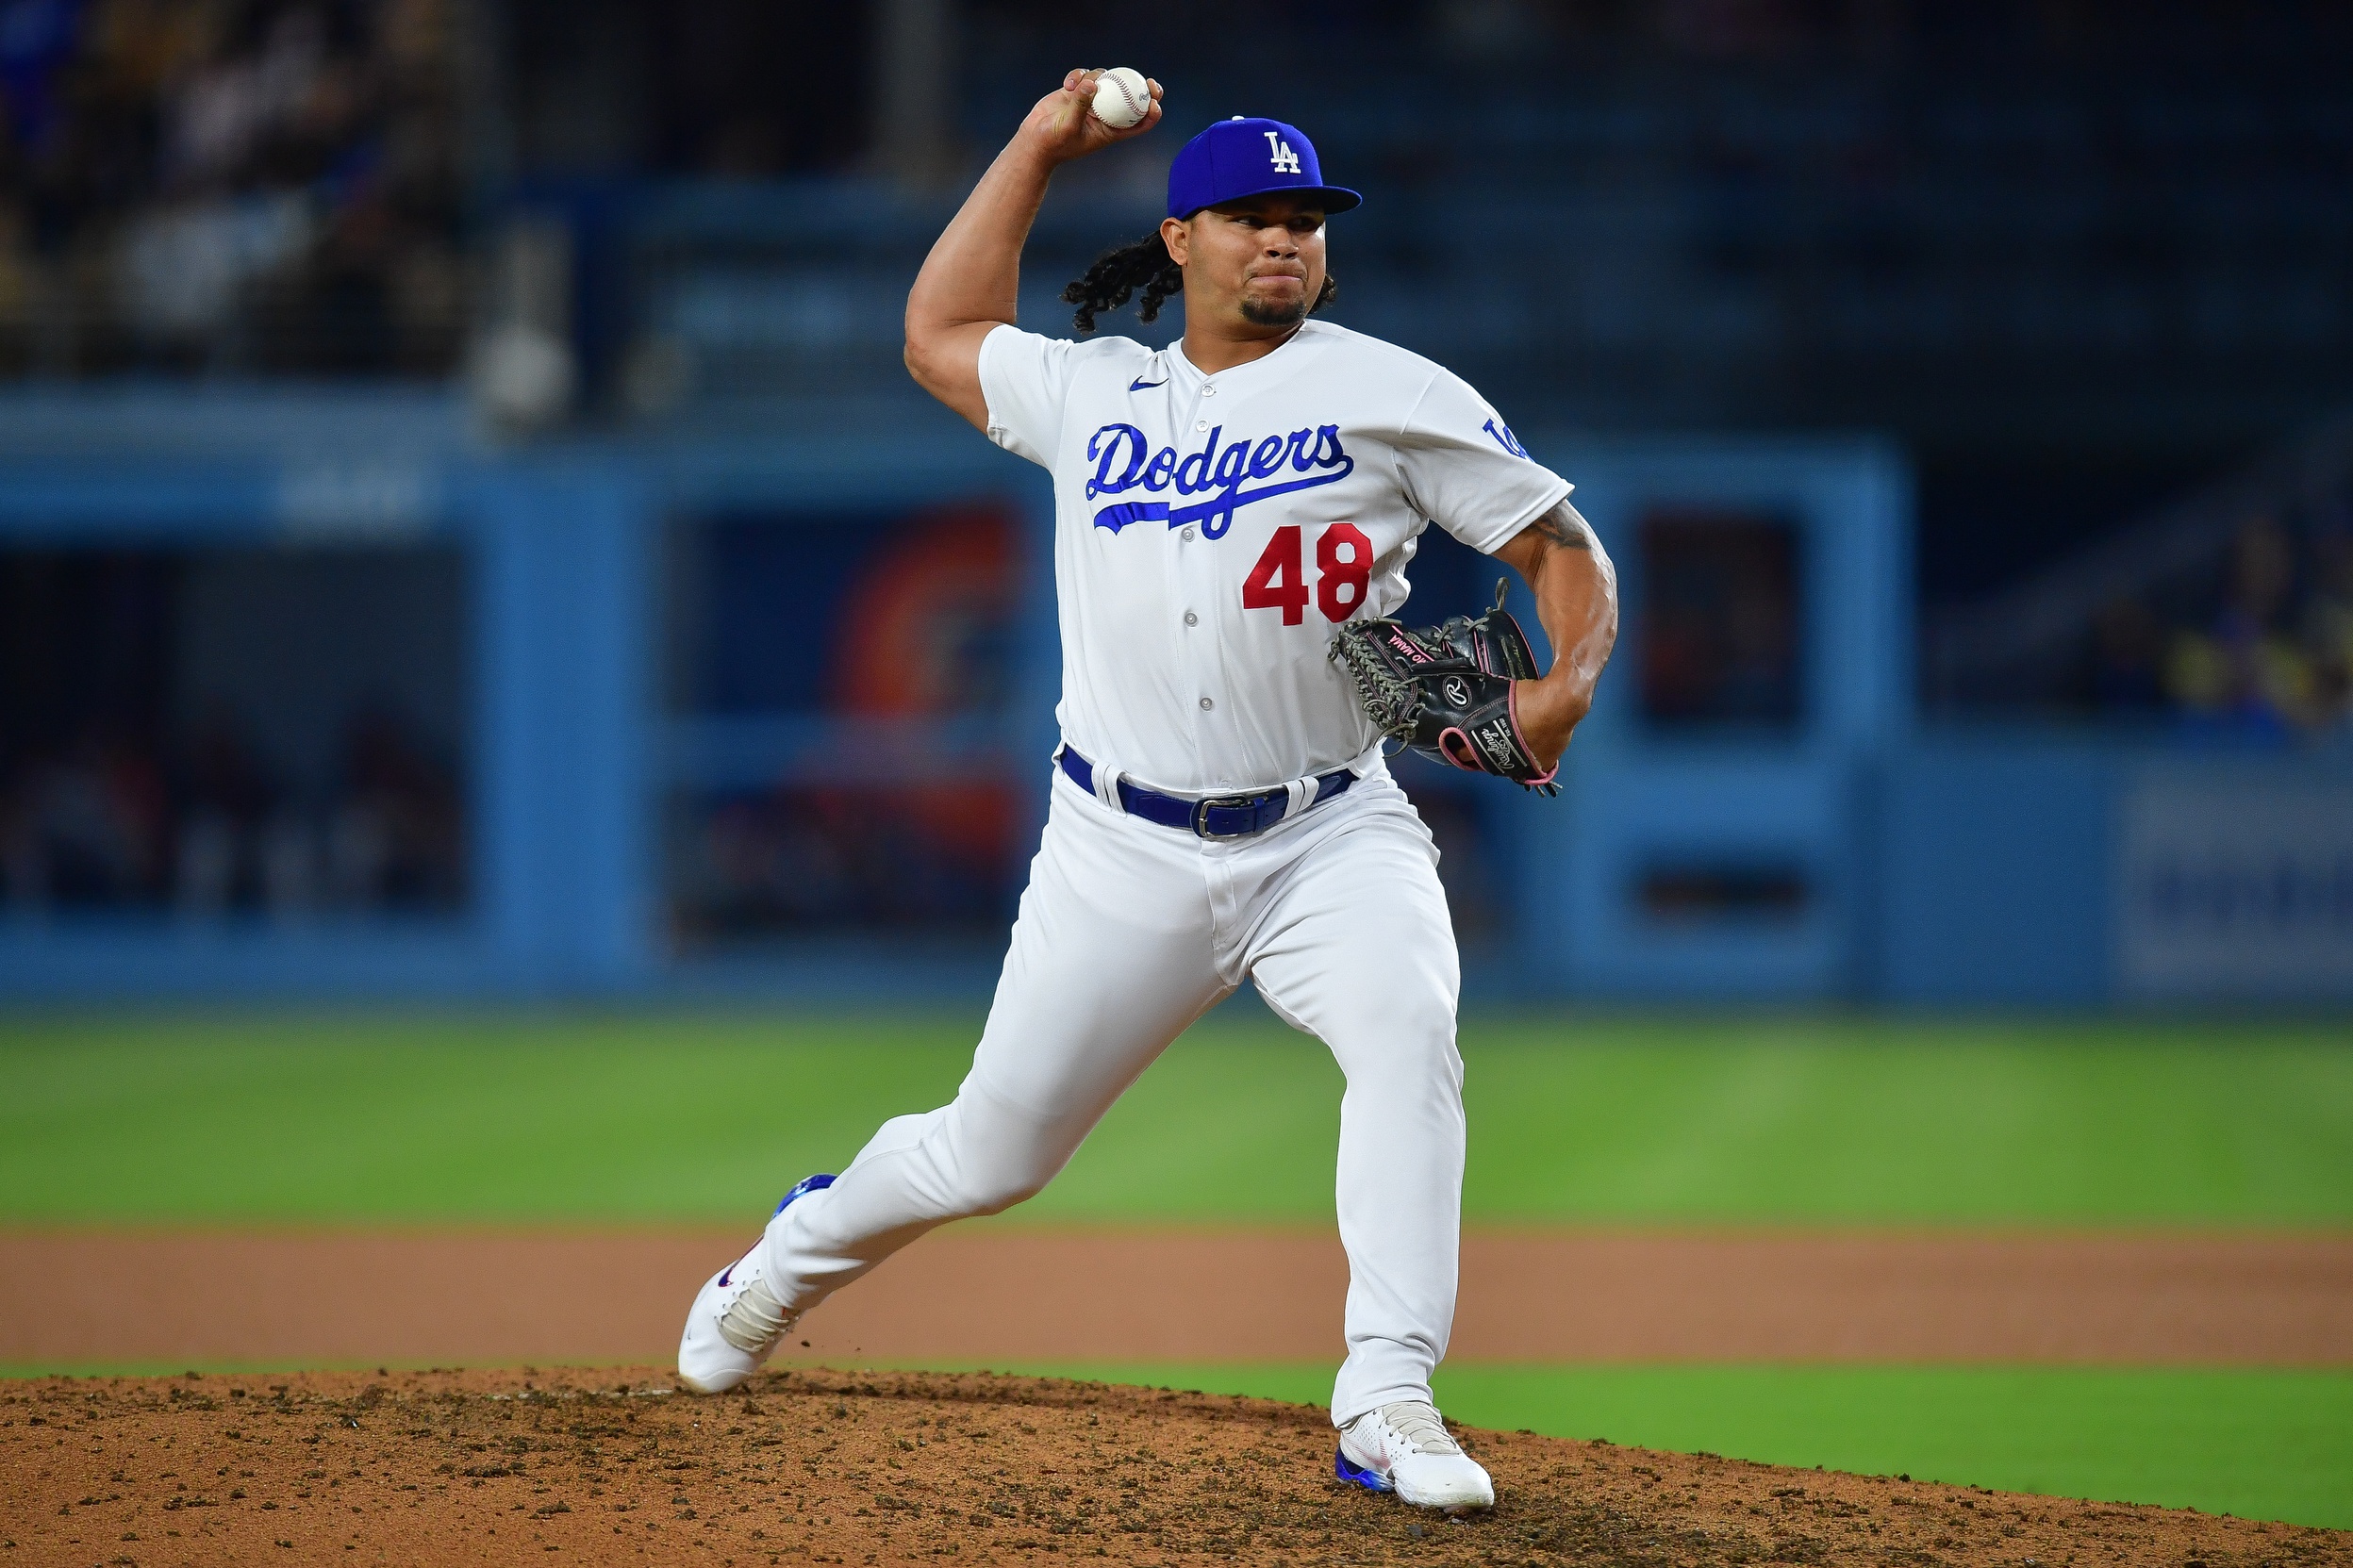 Dodgers News: Brusdar Graterol Gets Emotional Discussing His Mother Seeing Him Pitch for First Time